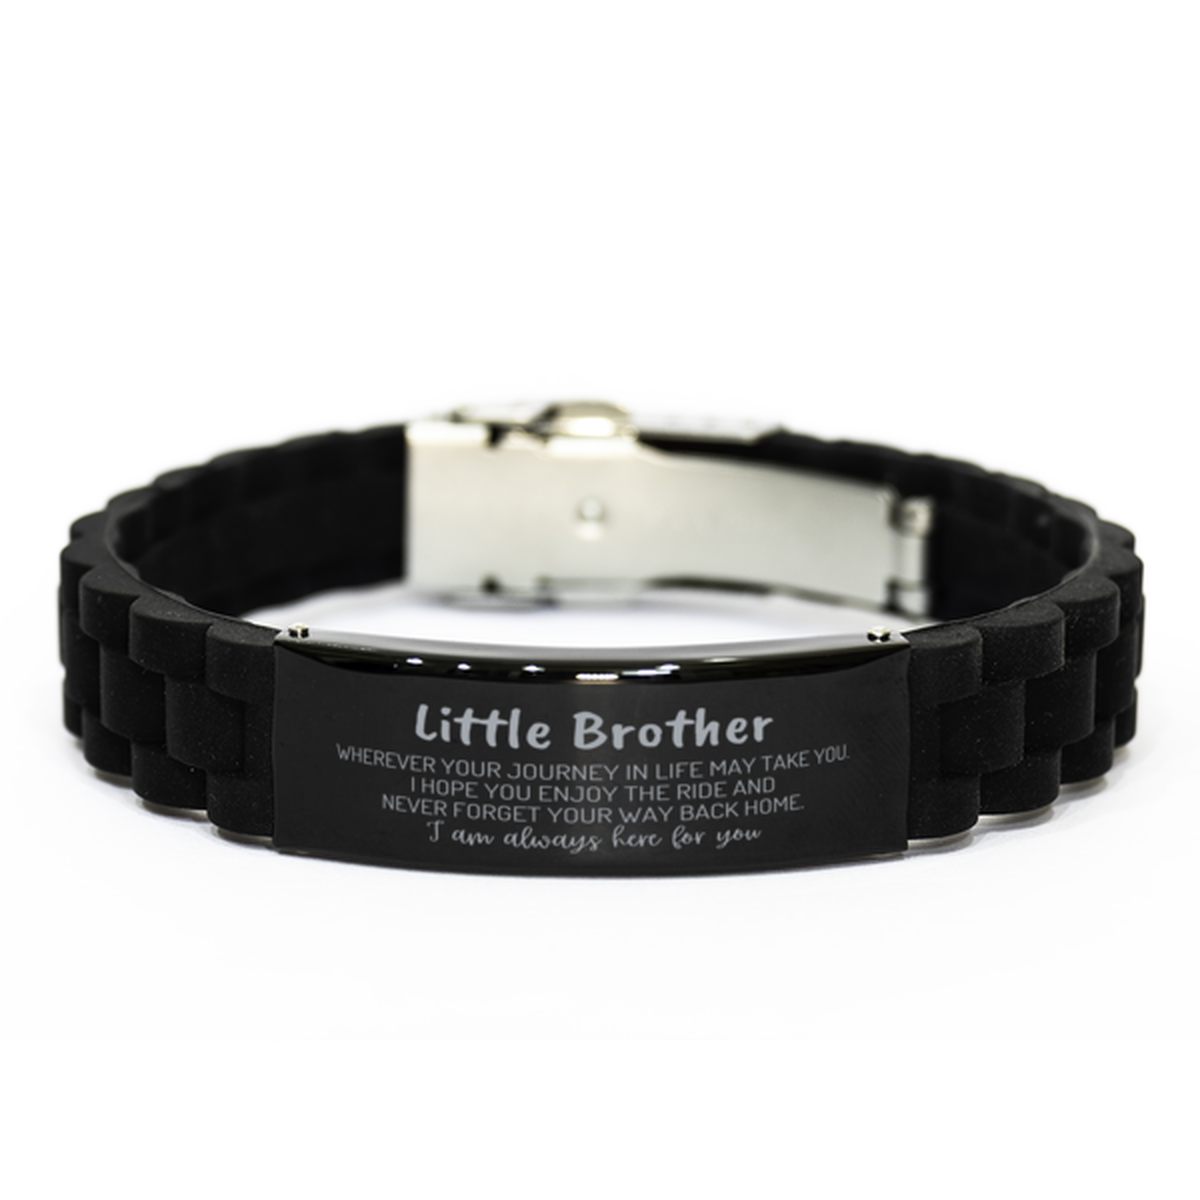 Little Brother wherever your journey in life may take you, I am always here for you Little Brother Black Glidelock Clasp Bracelet, Awesome Christmas Gifts For Little Brother, Little Brother Birthday Gifts for Men Women Family Loved One